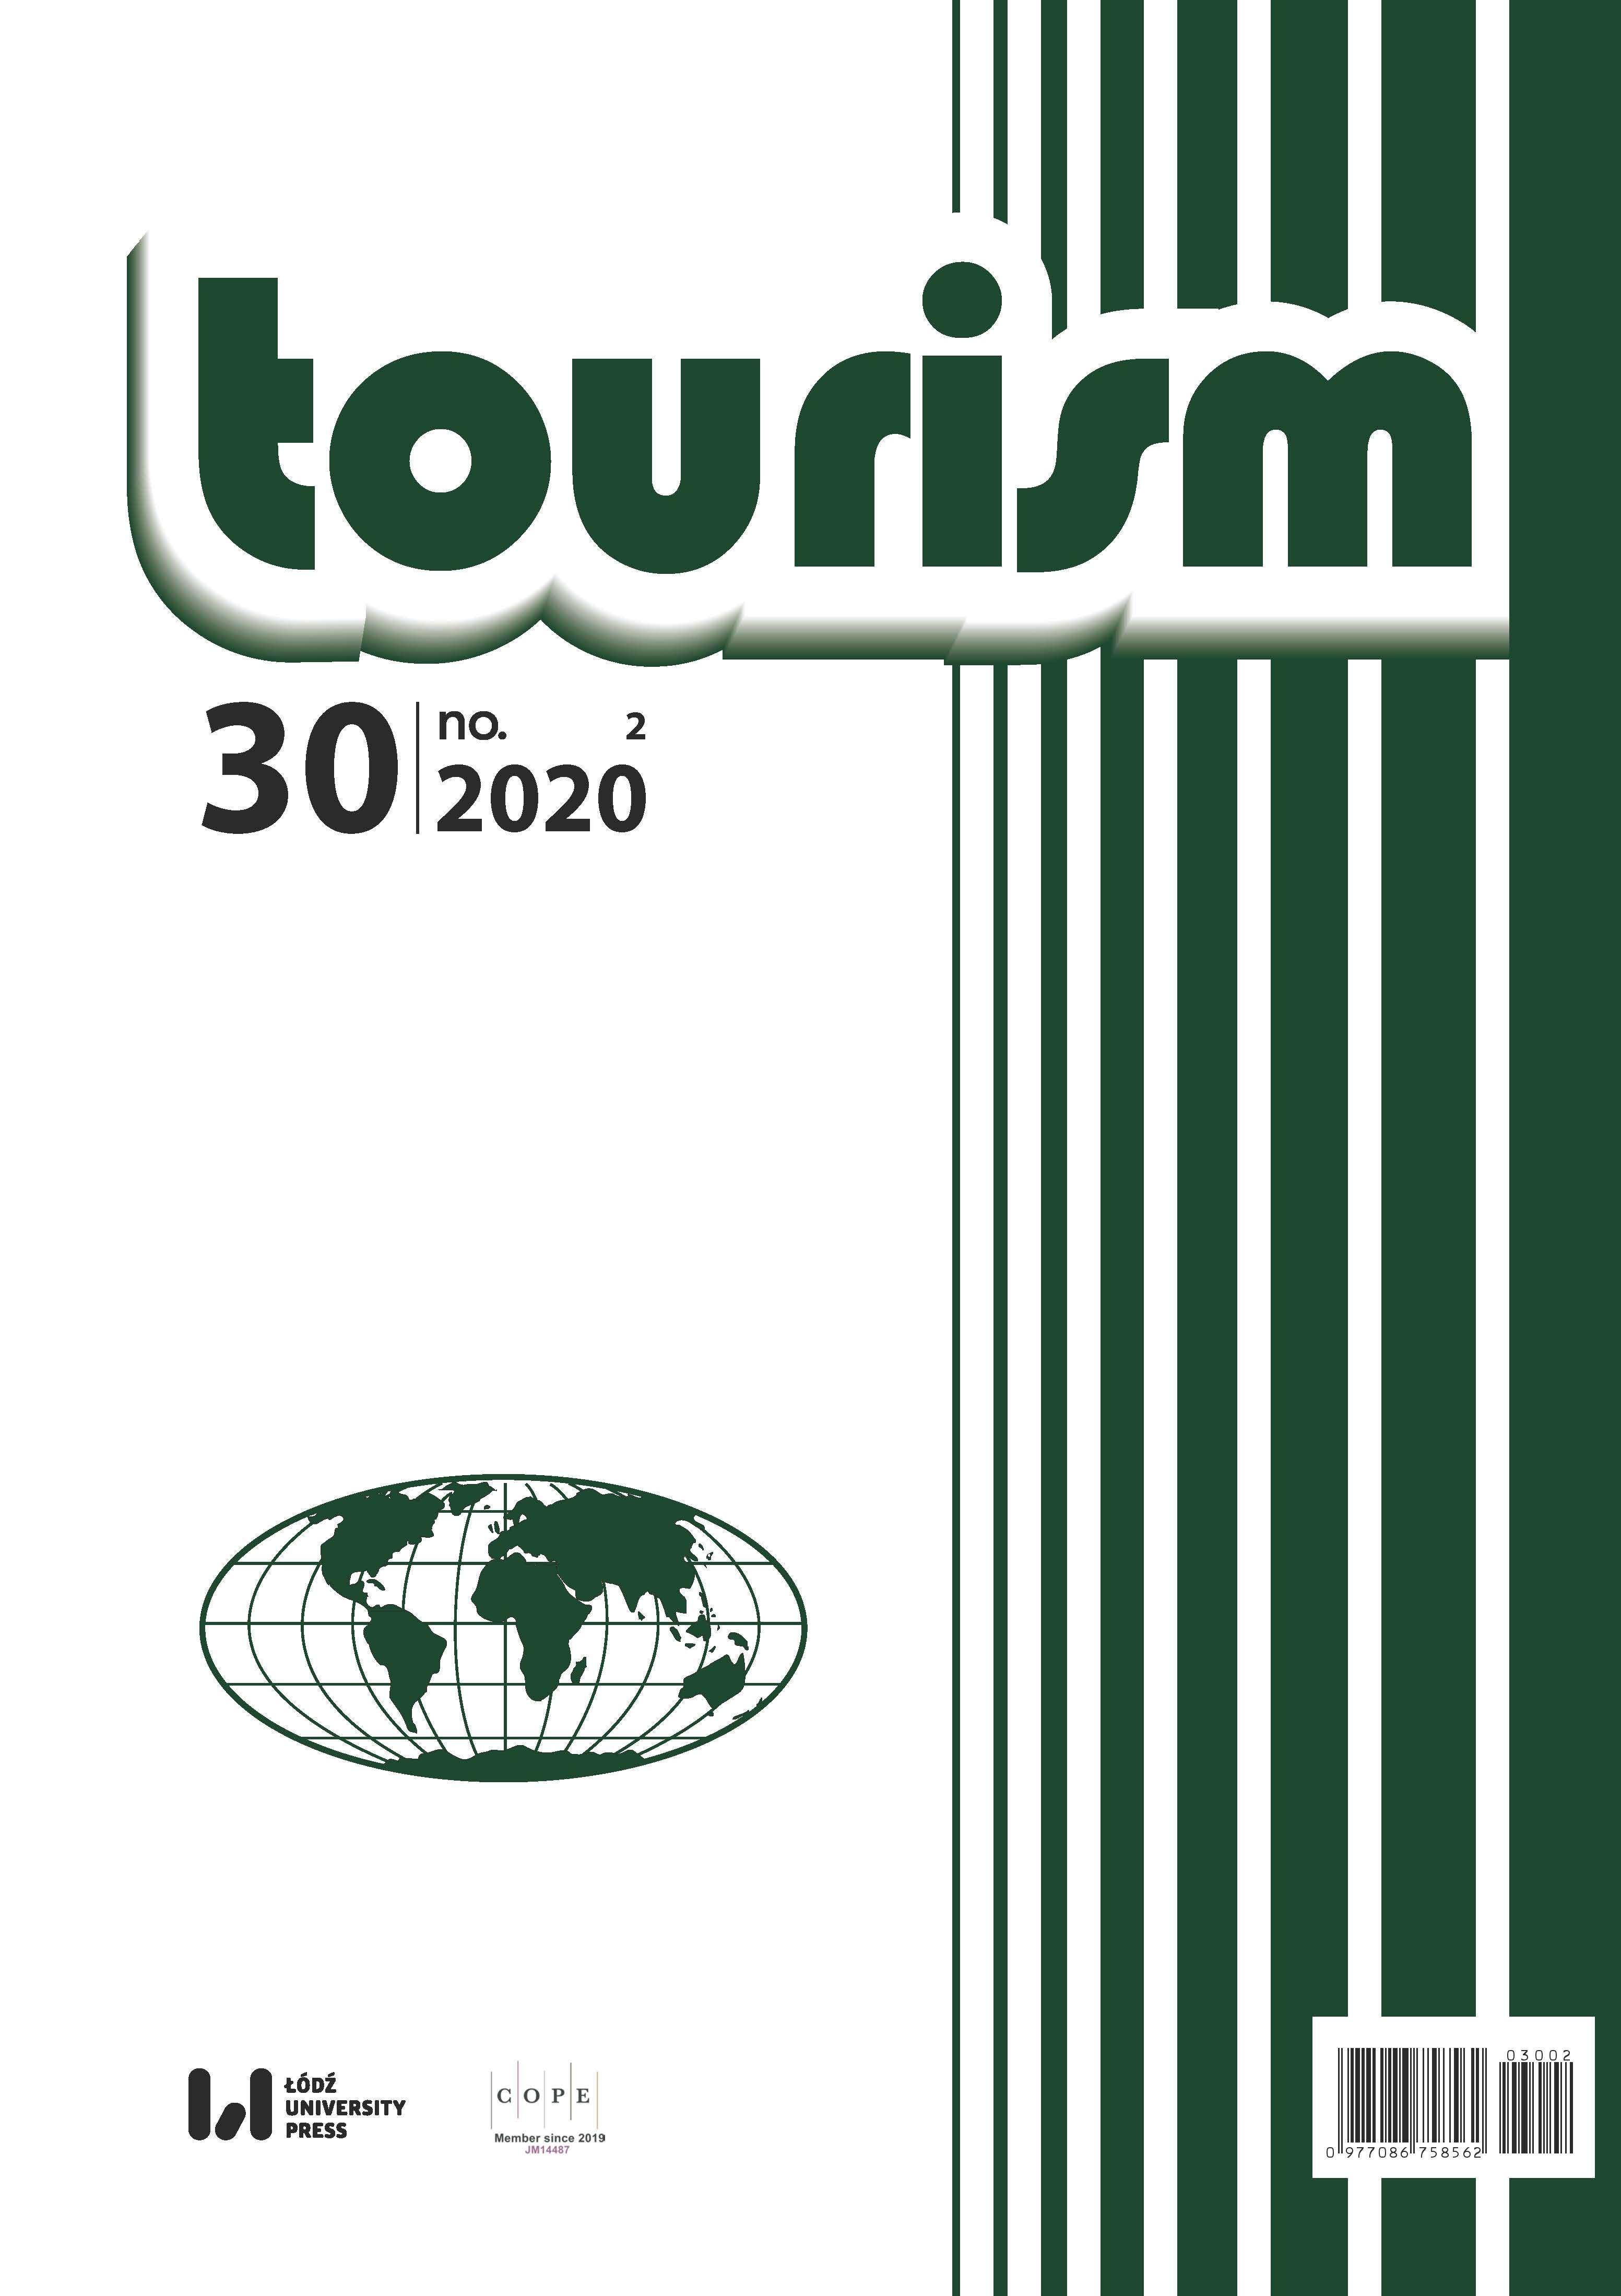 University education and levels of social competence in tourism and recreation students